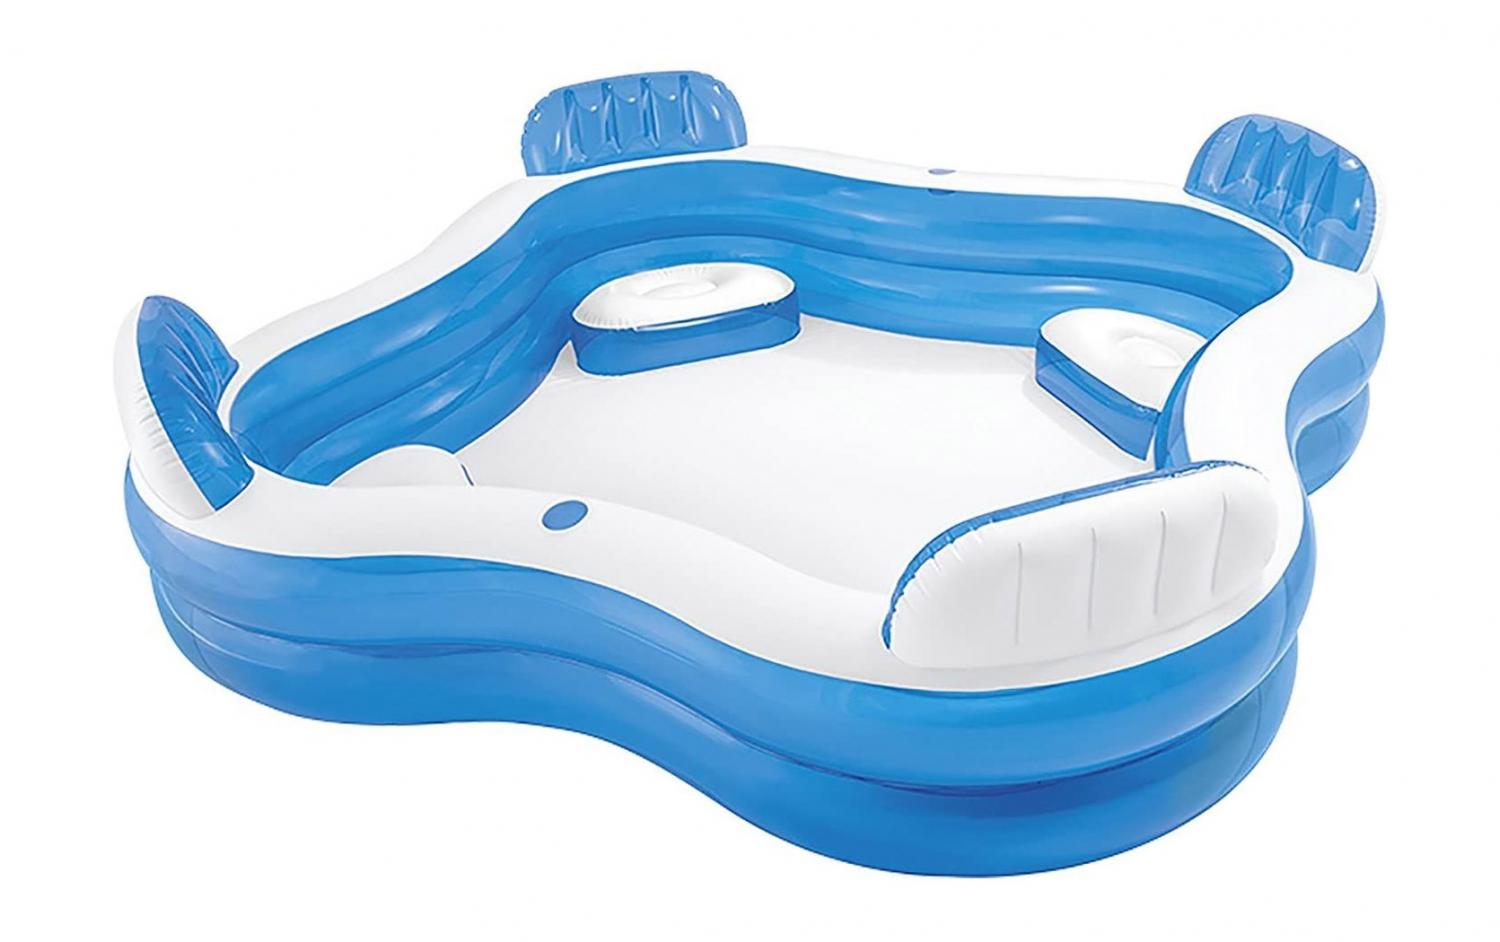 Inflatable Lounge Chair Pool - Blow-up pool with 4 built-in lounge chairs